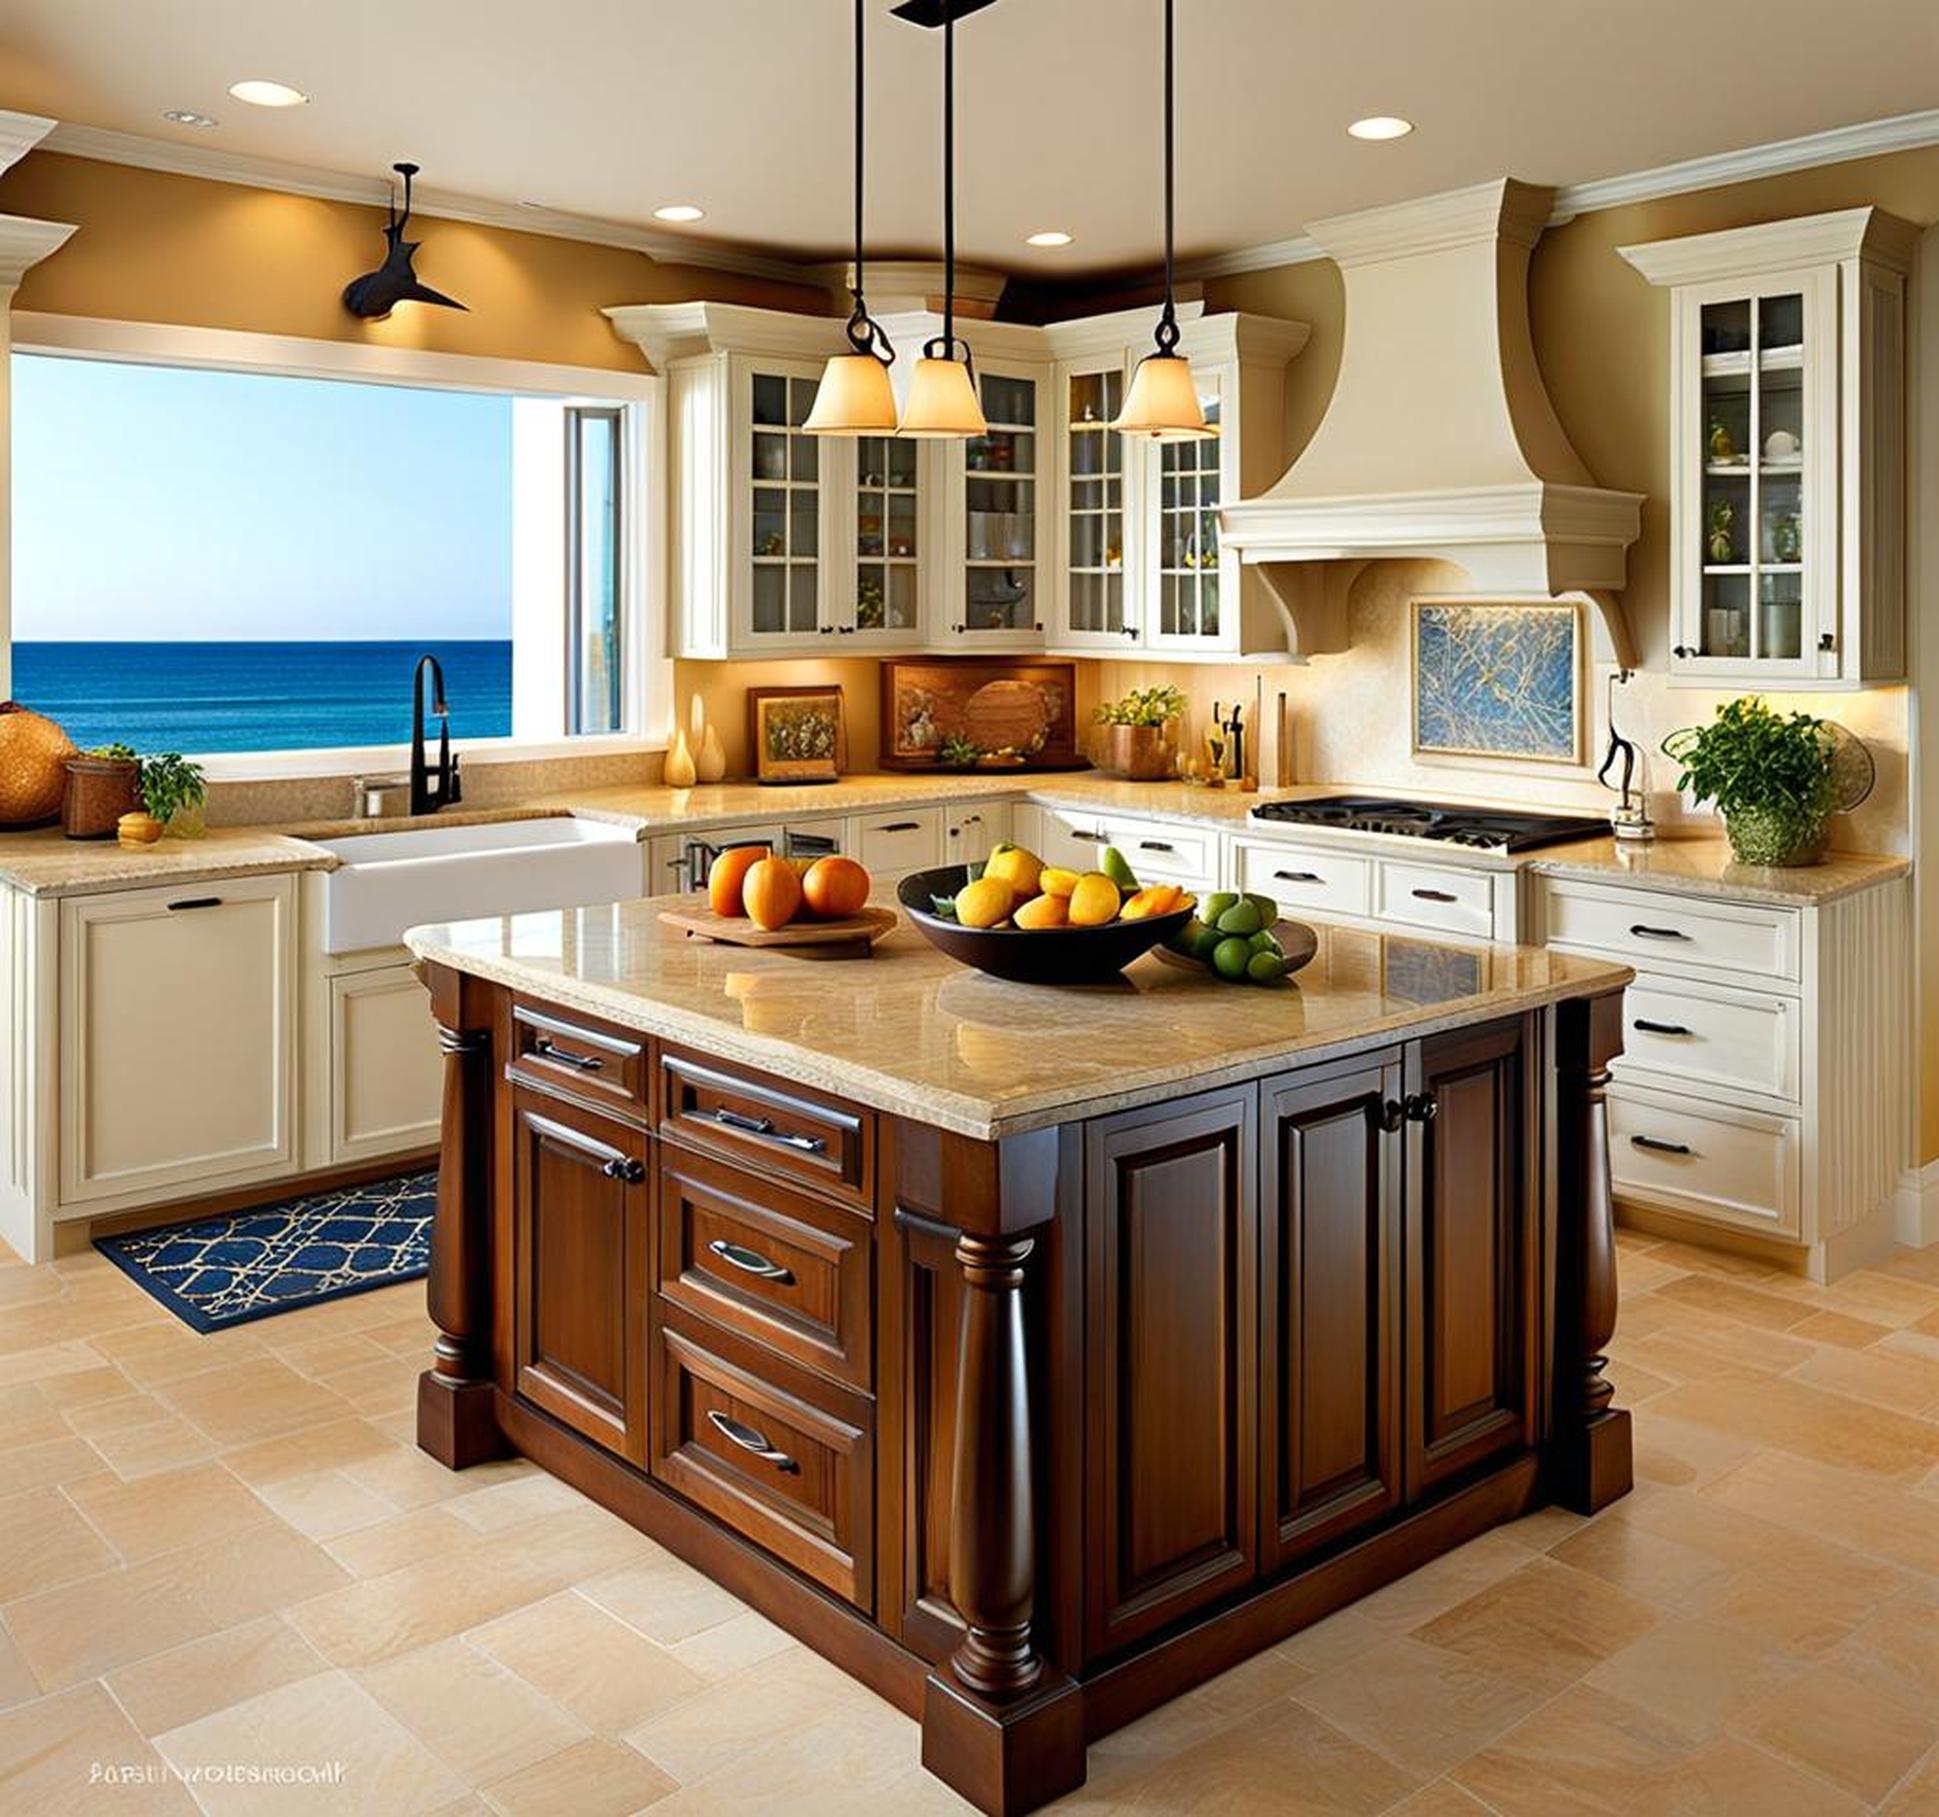 how to decorate a kitchen island